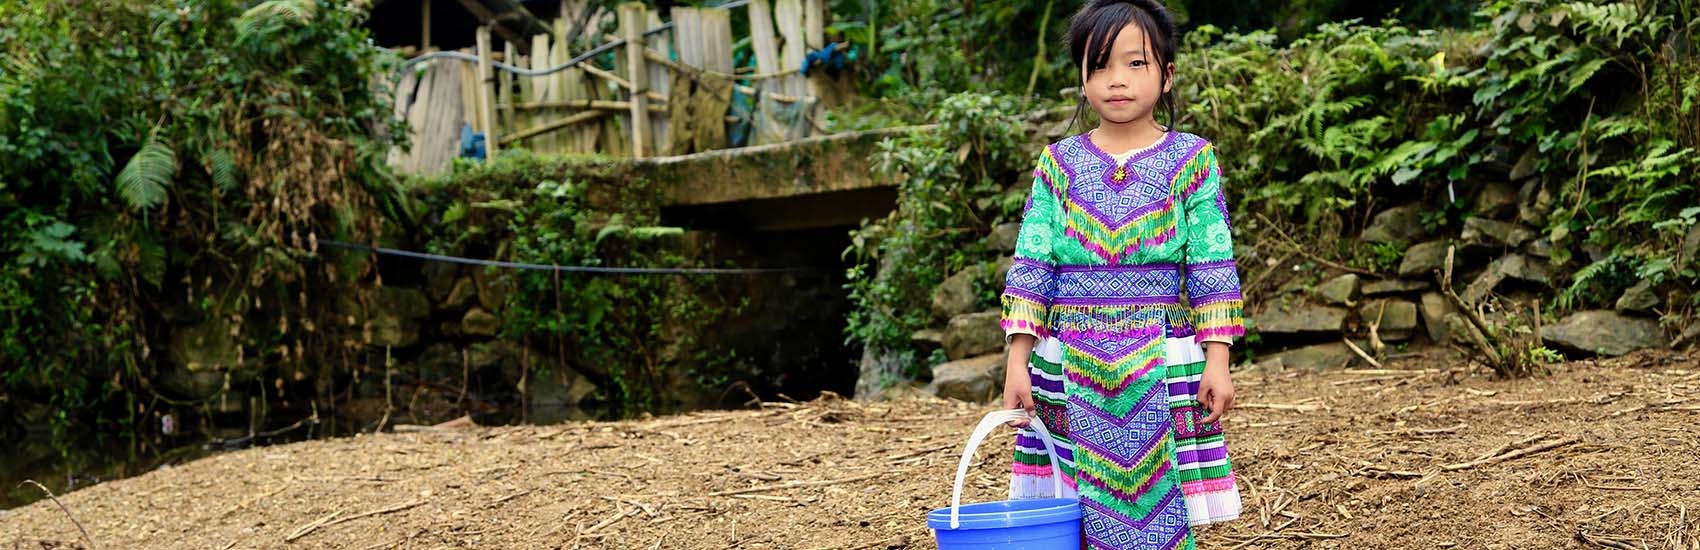 A young girl holds a blue bucket while standing next to a small river in Vietnam.